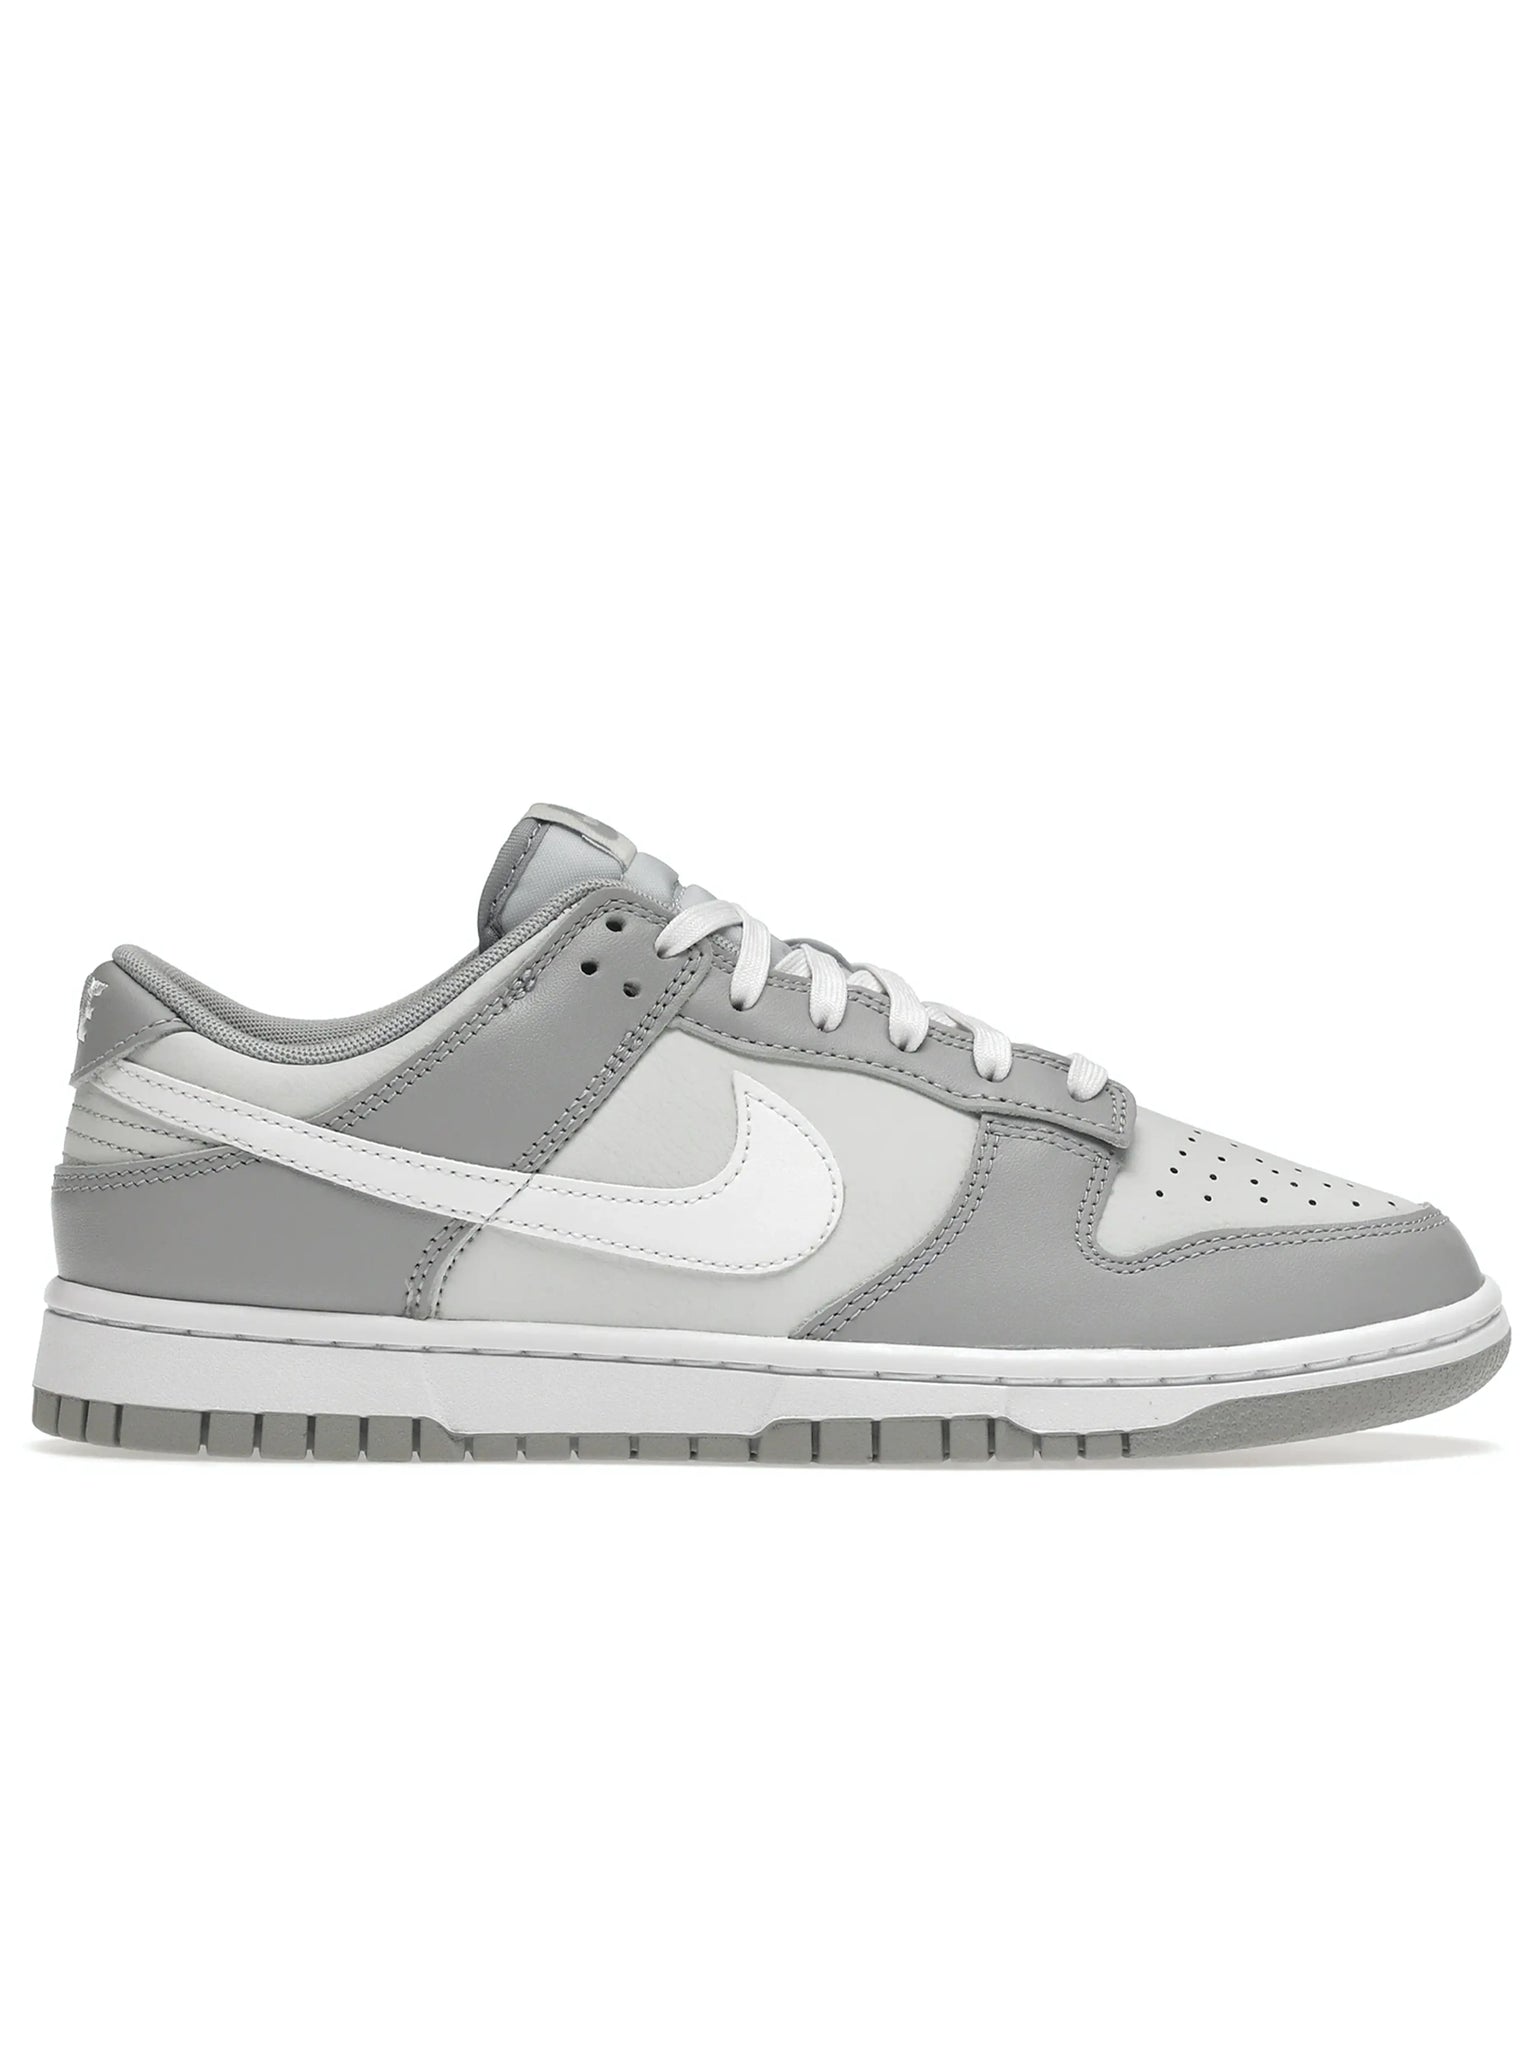 Nike Dunk Low Two Tone Grey (GS) Prior